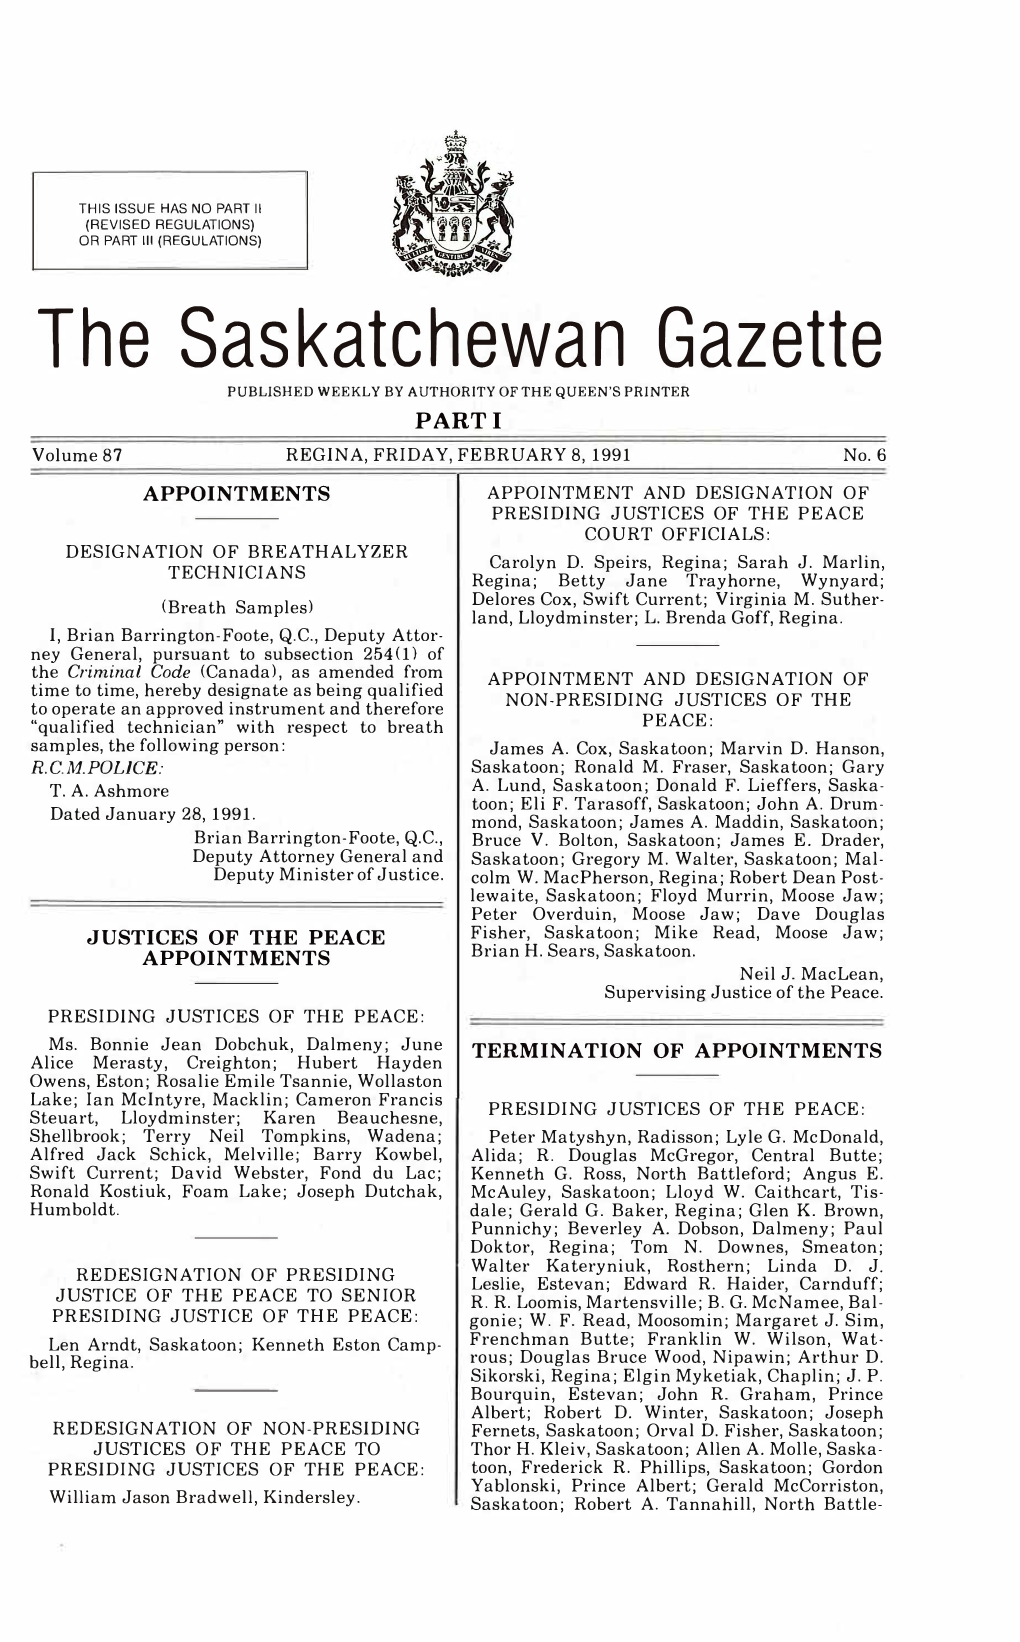 The Saskatchewan Gazette PUBLISHED WEEKLY by AUTHORITY of the QUEEN's PRINTER PARTI Volume 87 REGINA, FRIDAY, FEBRUARY 8, 1991 No